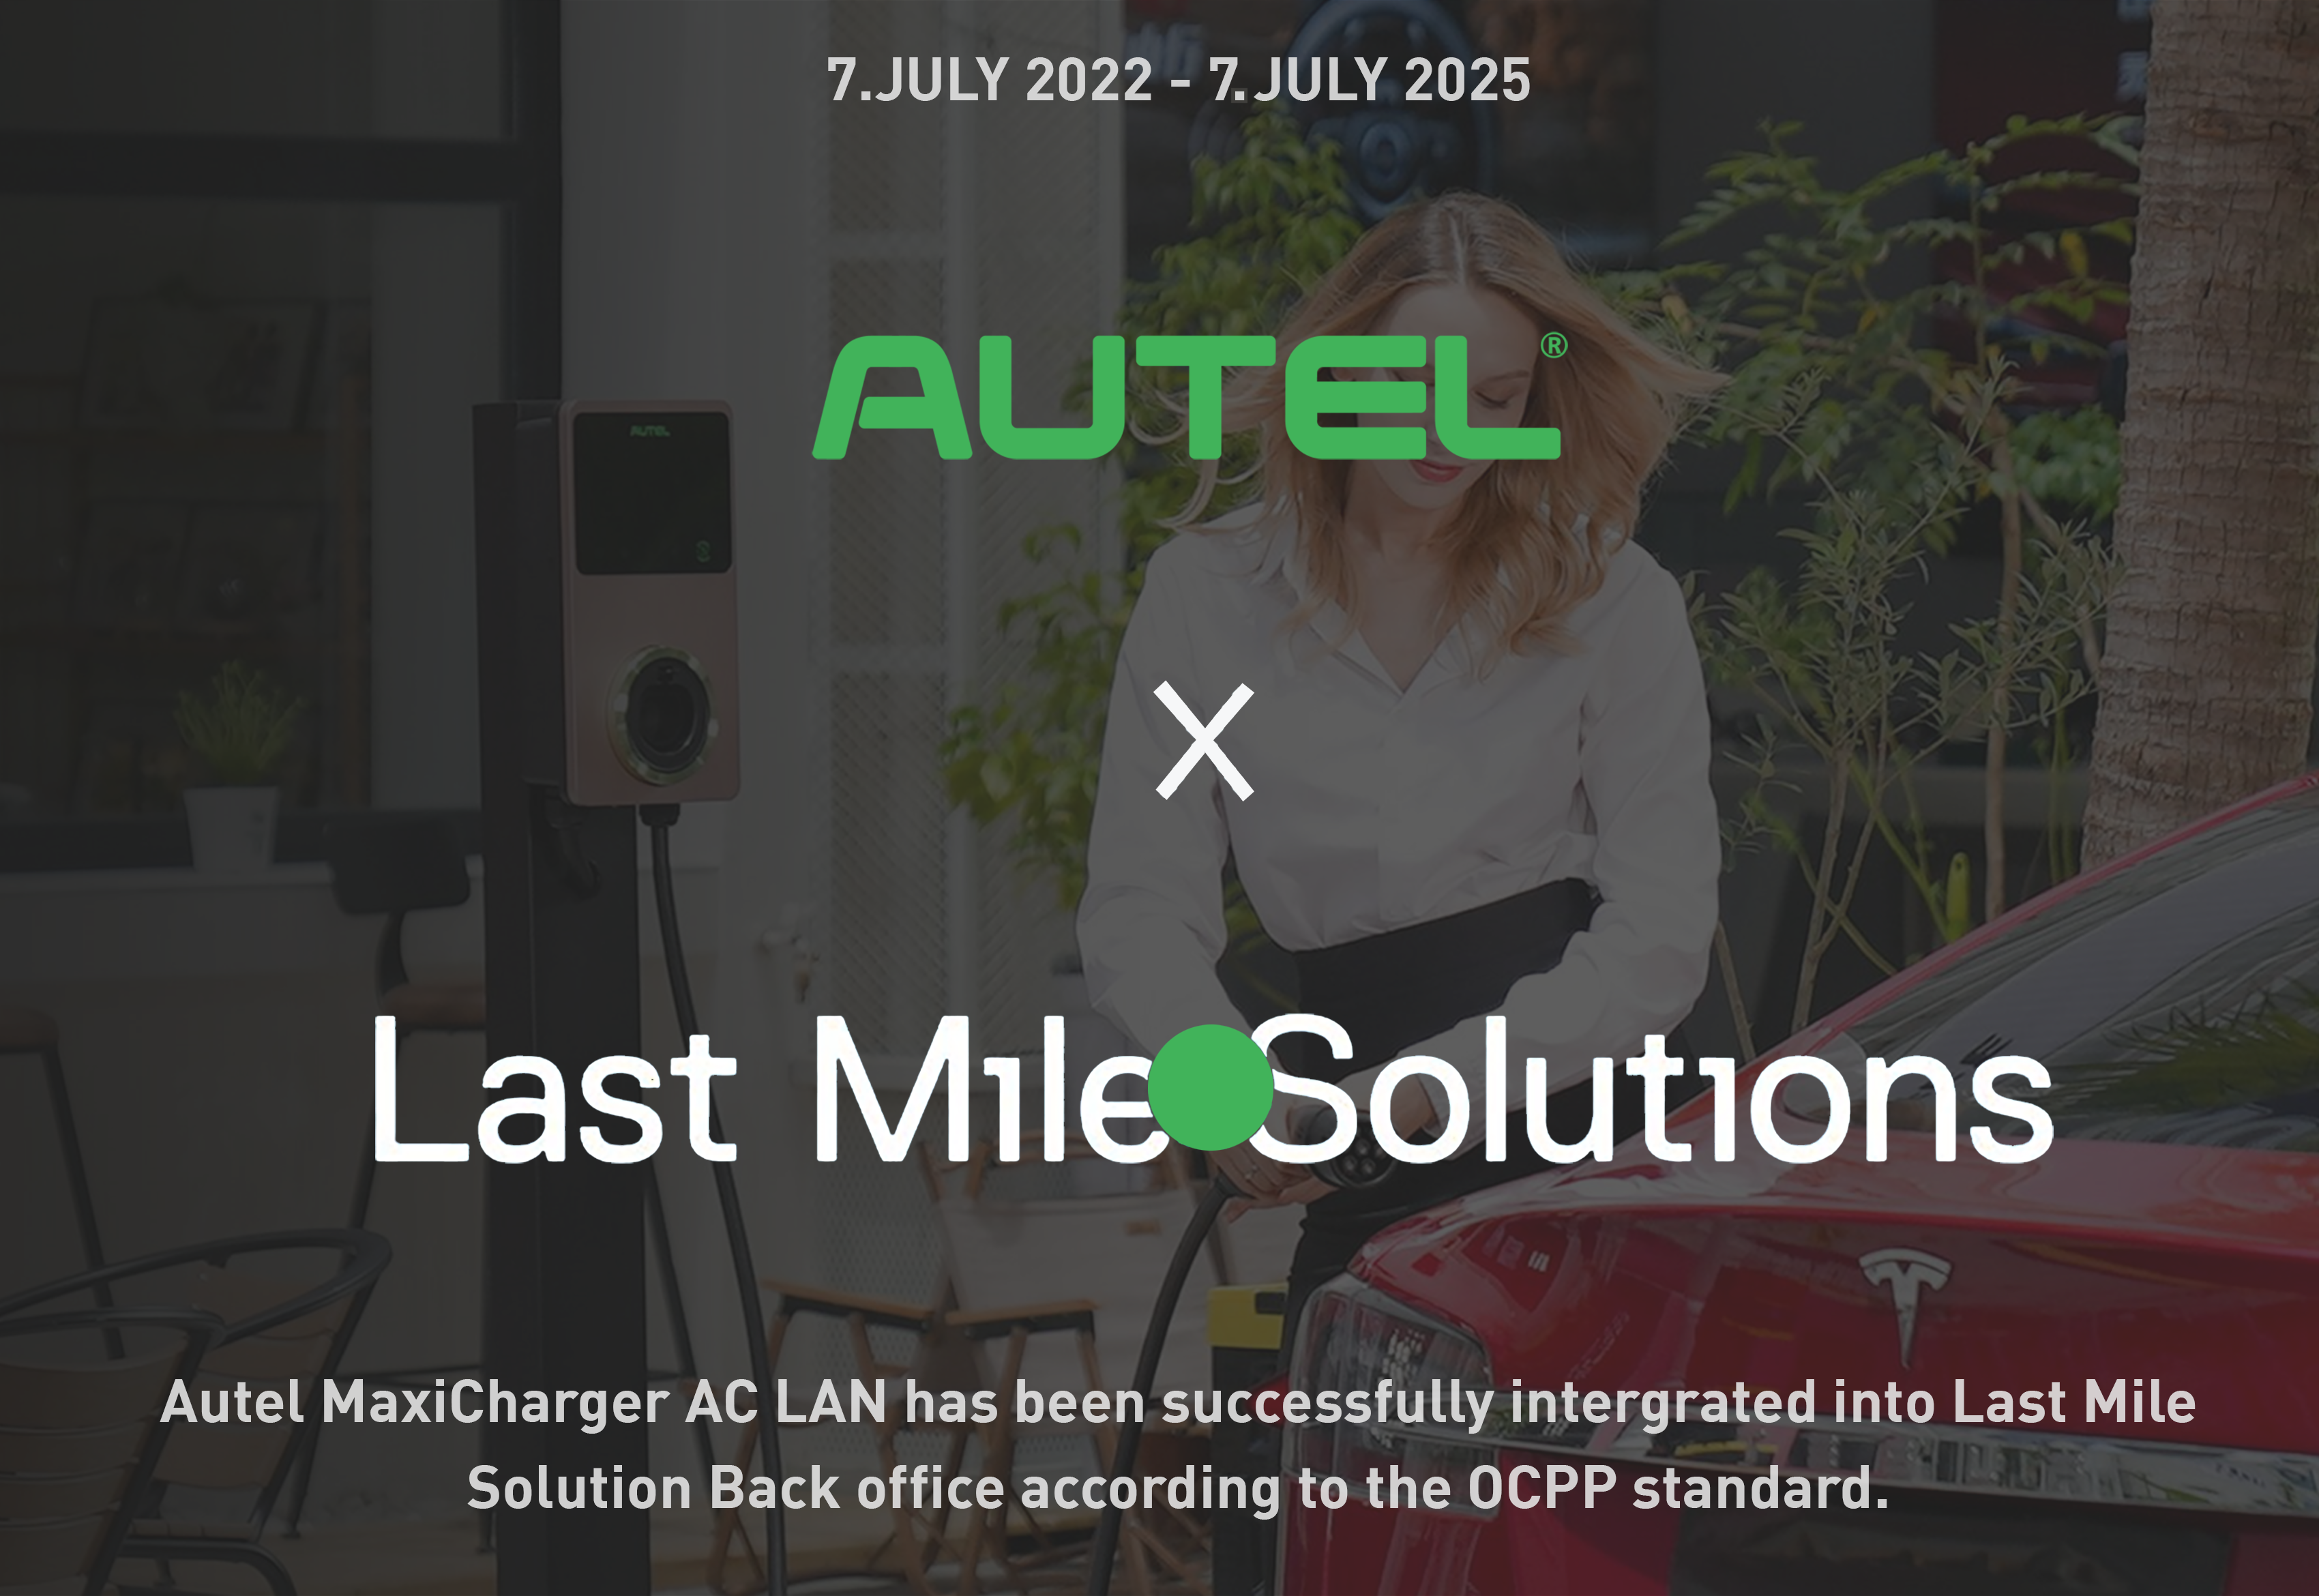 AUTEL now fully compatible with Last Mile Solutions